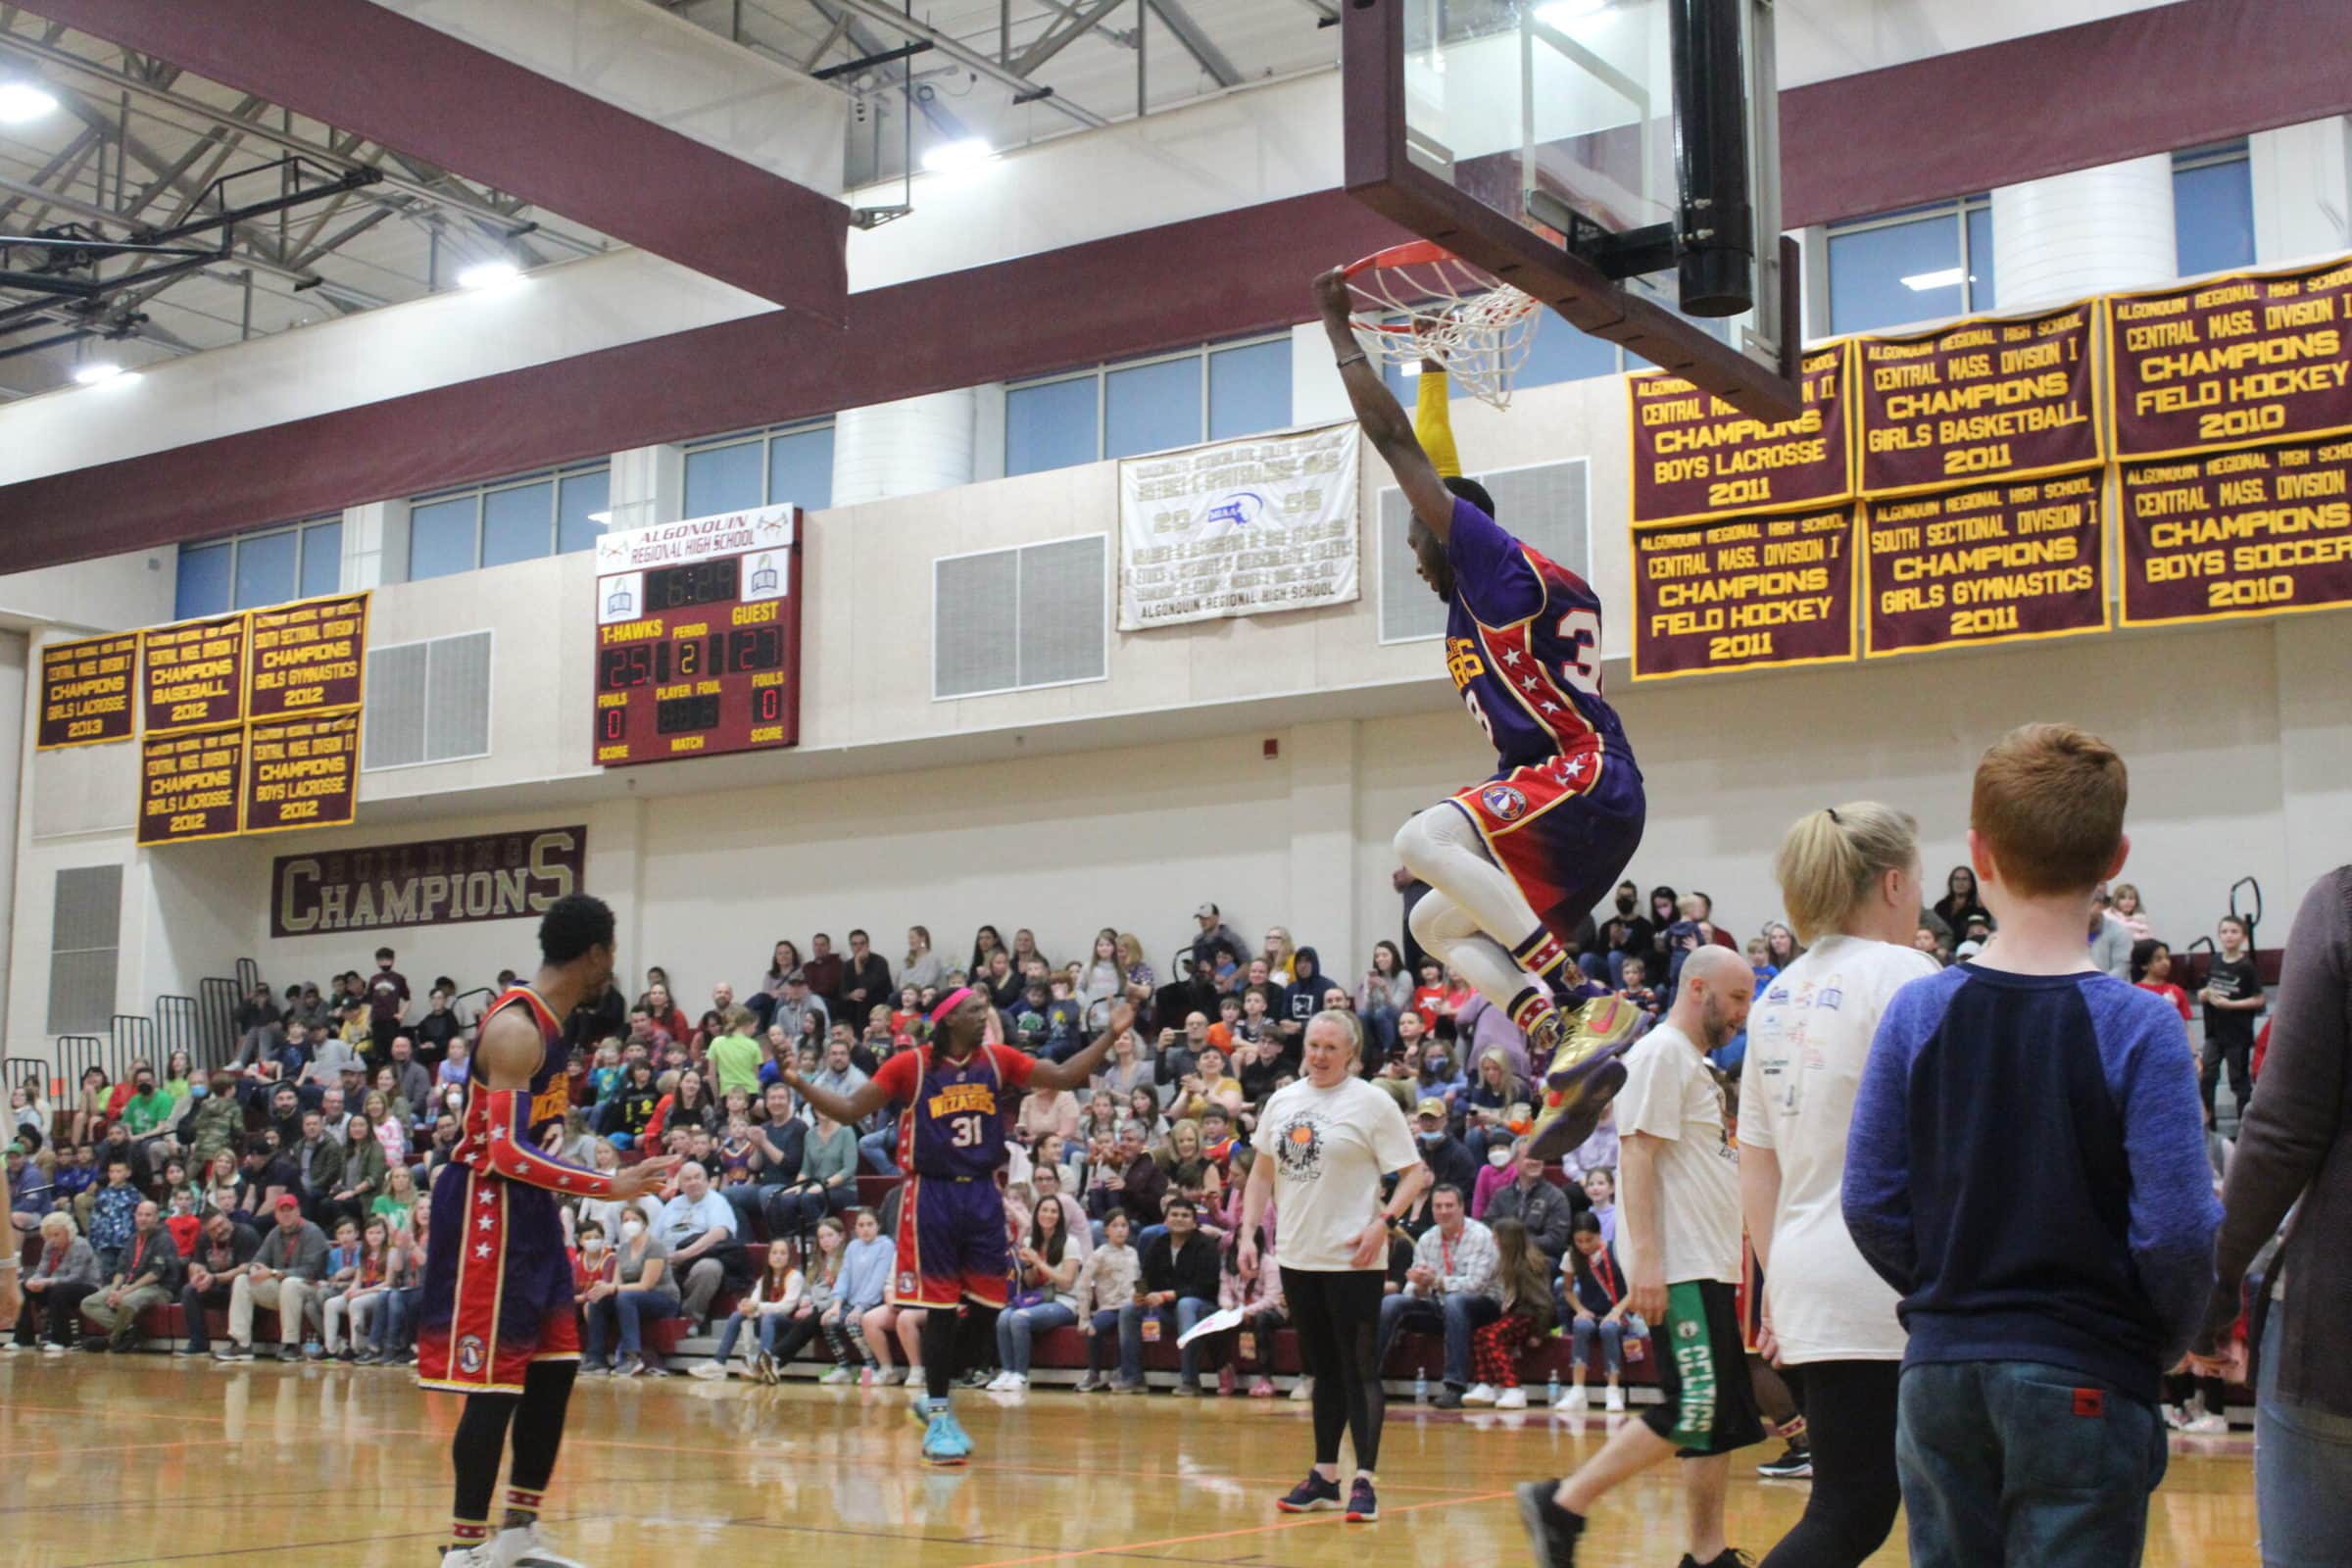 Harlem Wizards come to Northborough for schools fundraiser